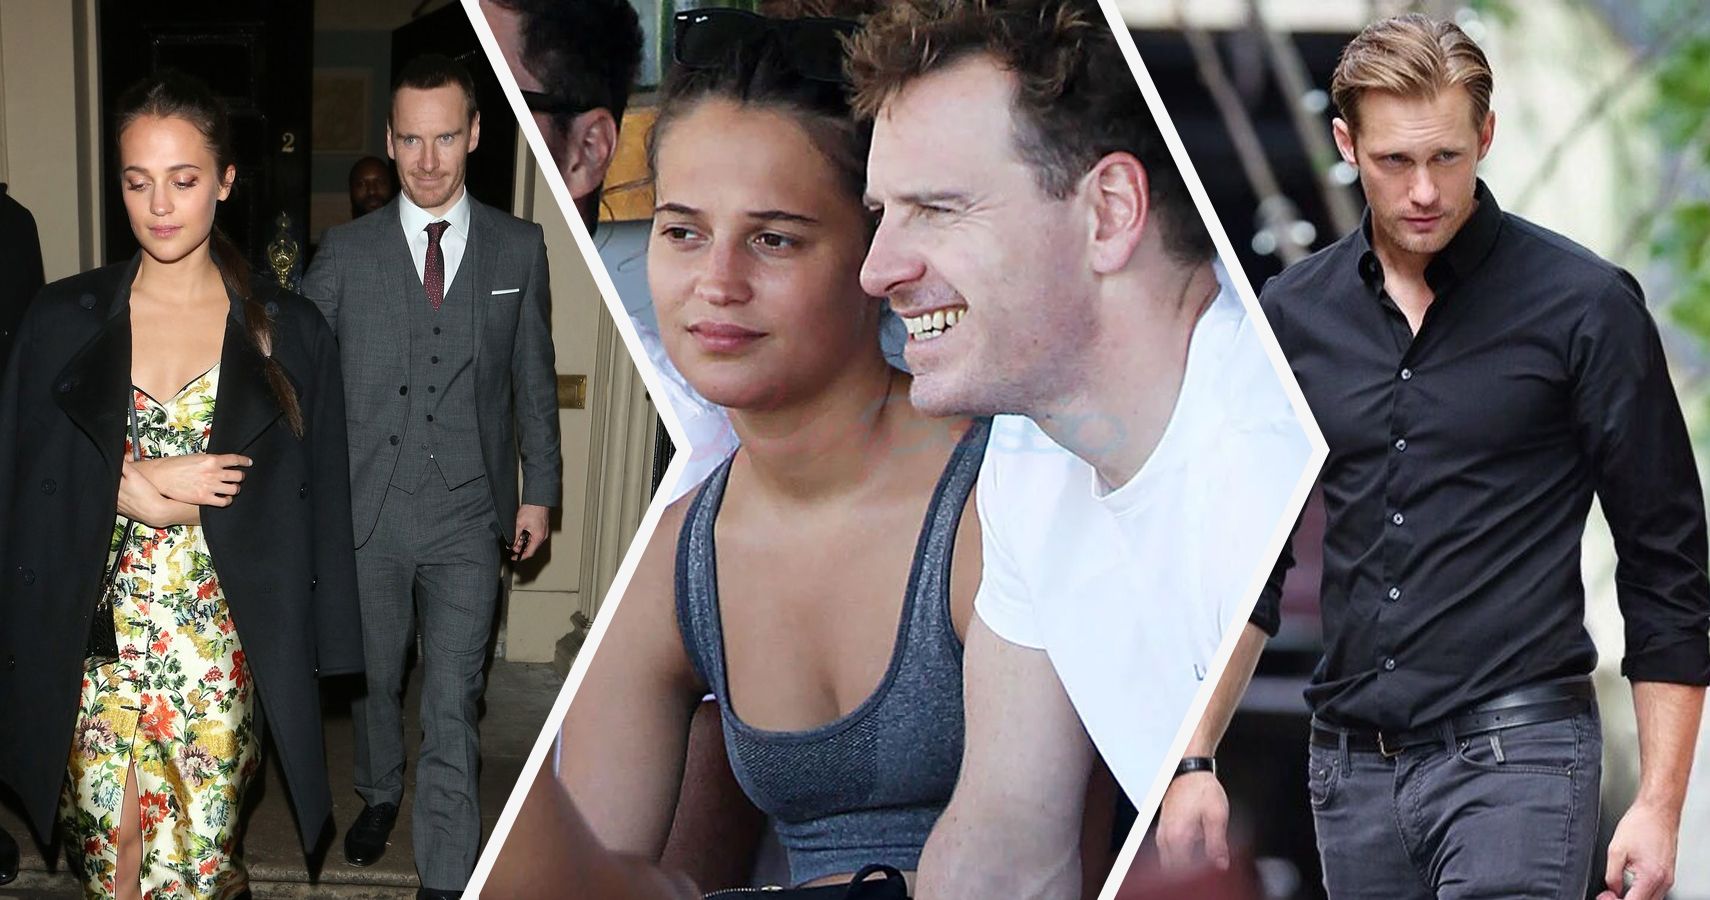 Alicia Vikander on date night with husband Michael Fassbender in Paris